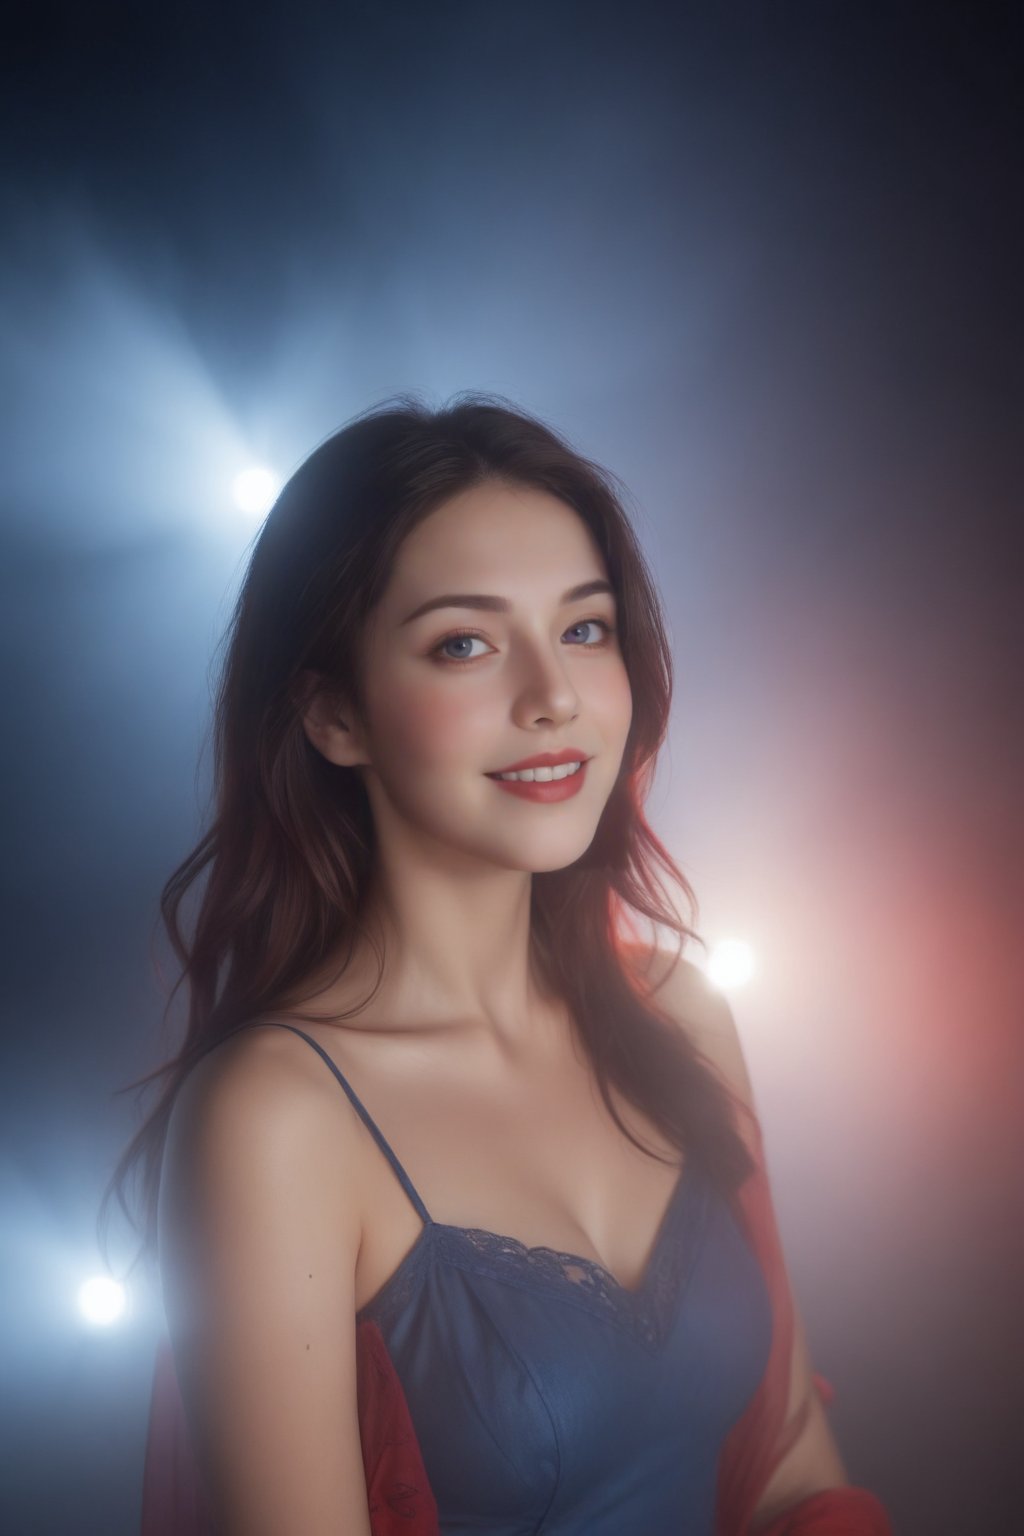 hubggirl, a mysterious woman, fog, movie lights, blue and red theme, smiling